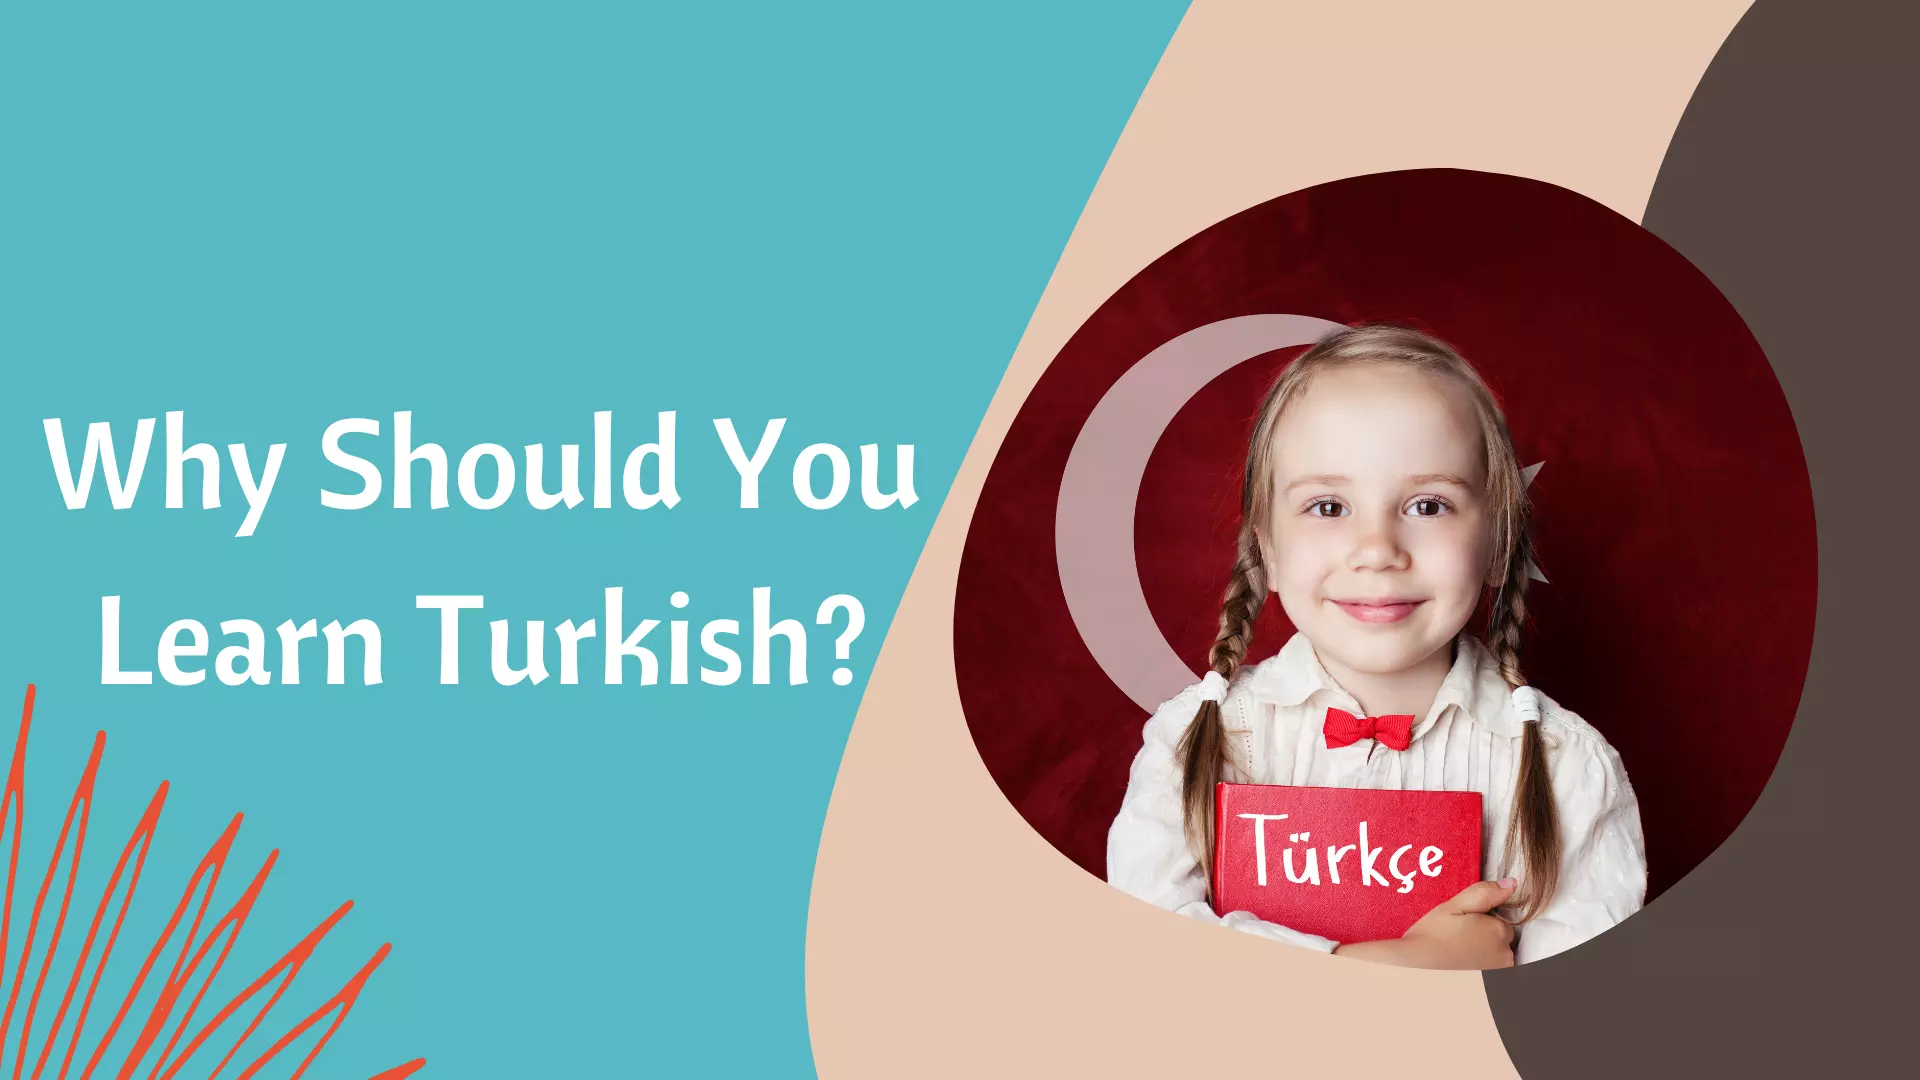 Why Should You Learn Turkish?